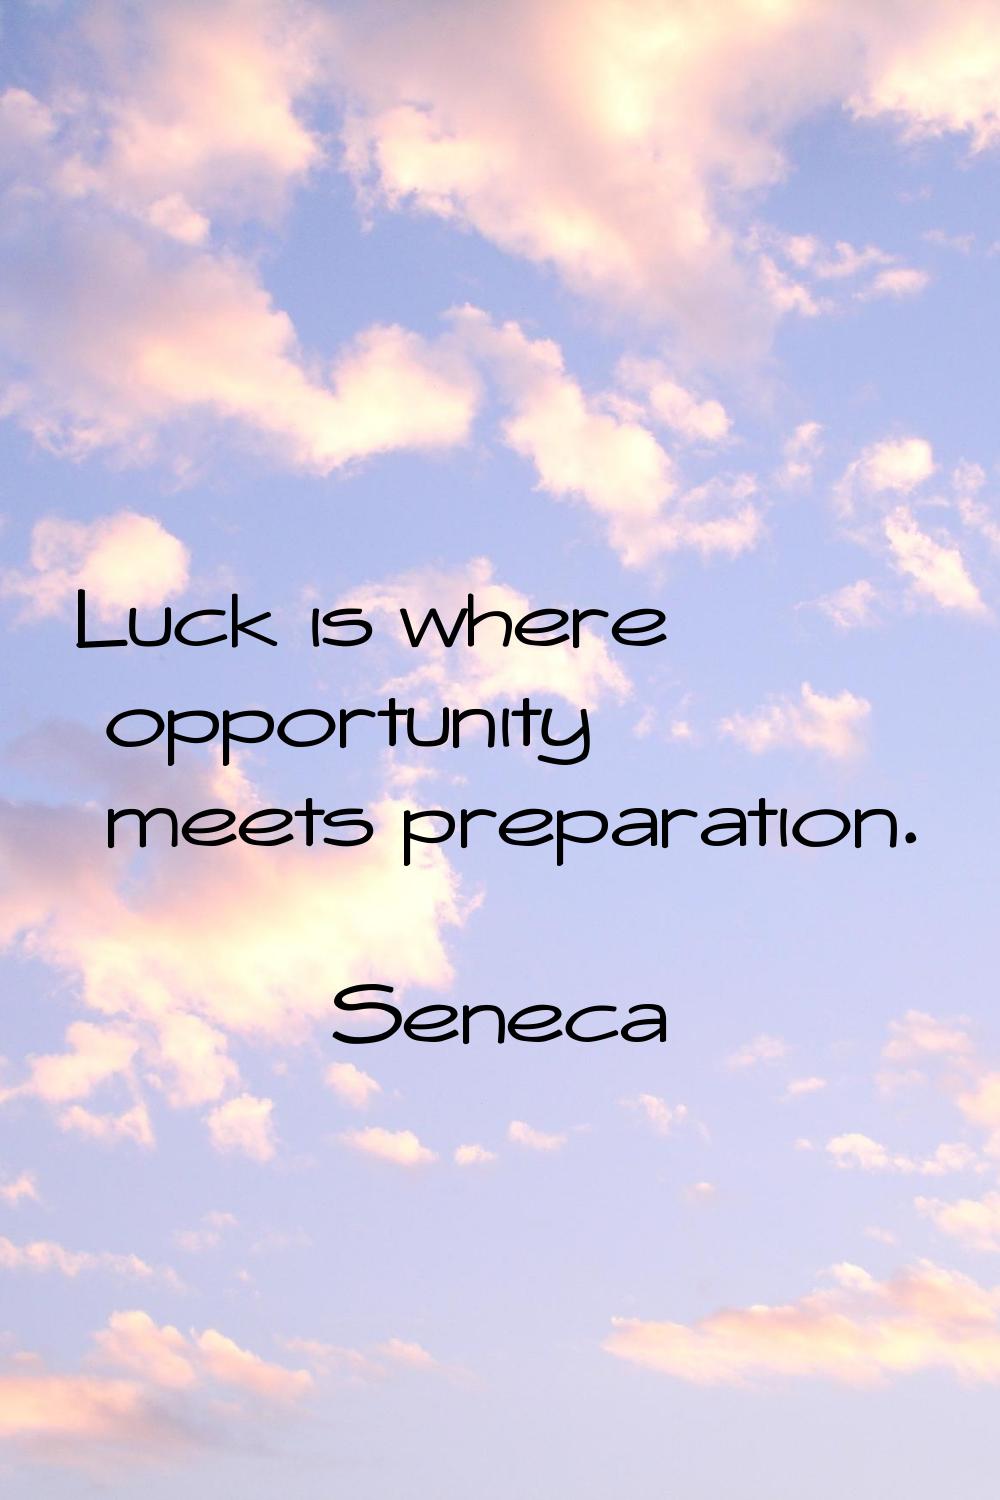 Luck is where opportunity meets preparation.